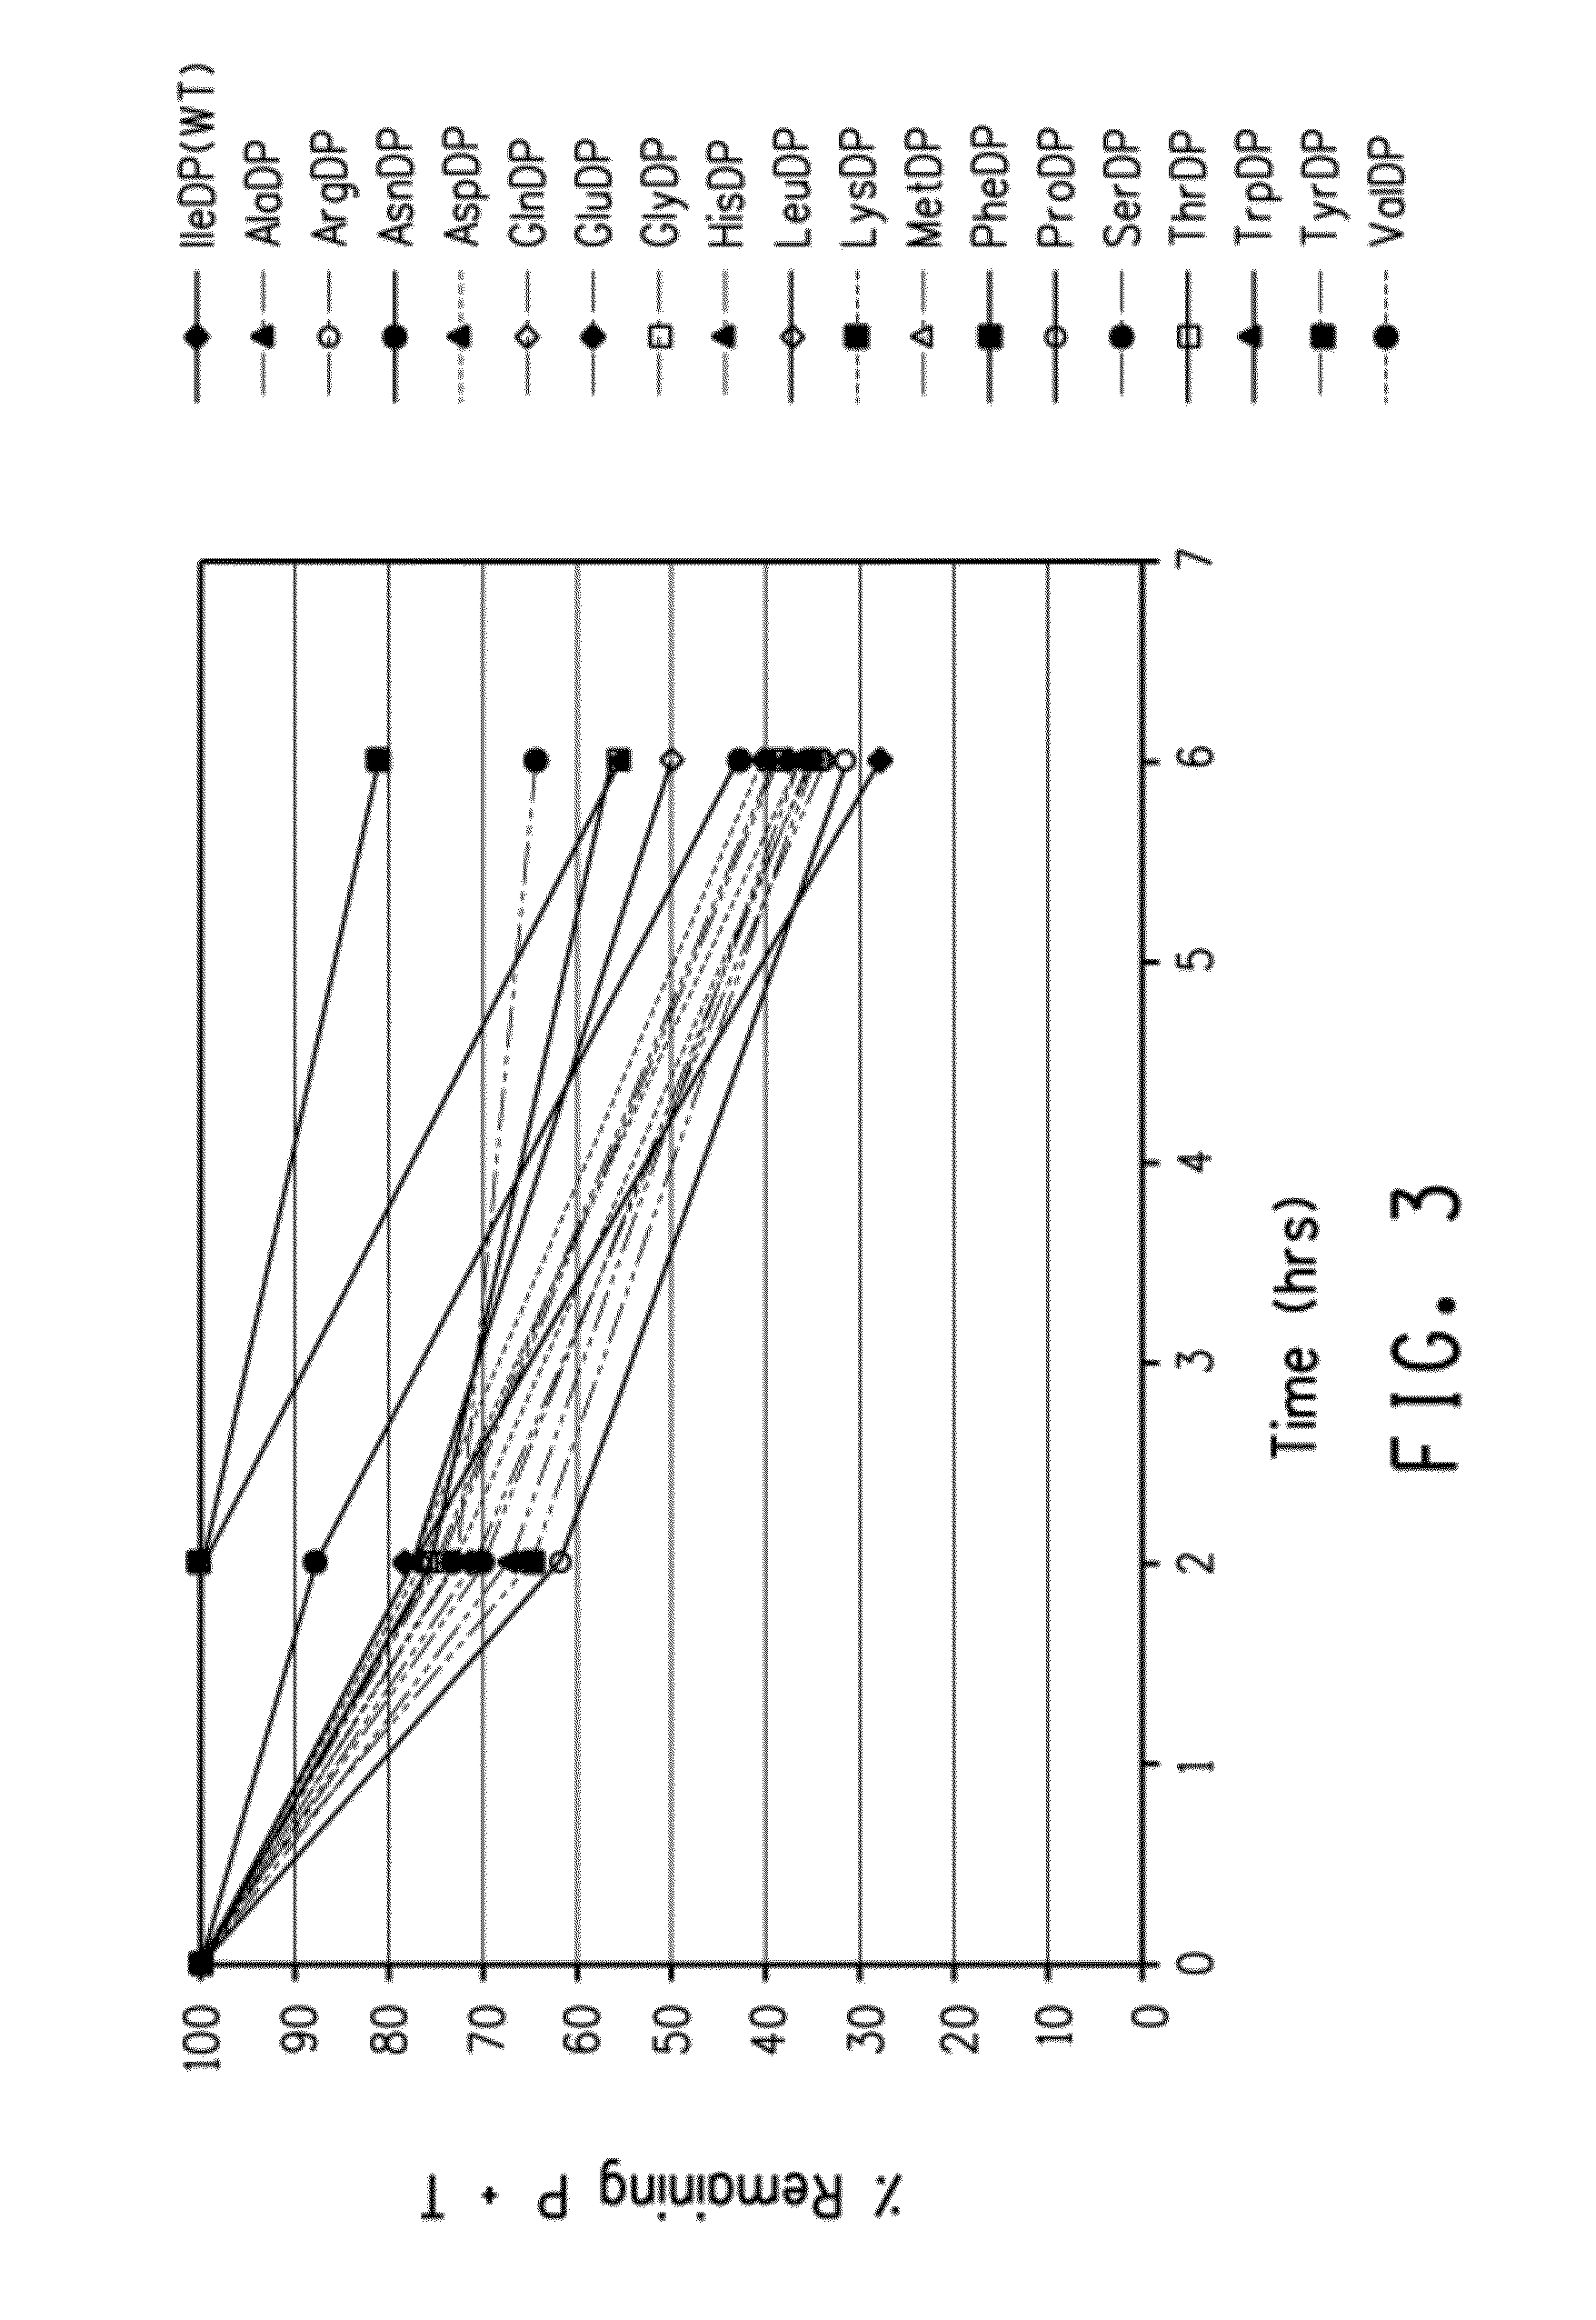 Acid-cleavable linkers exhibiting altered rates of acid hydrolysis